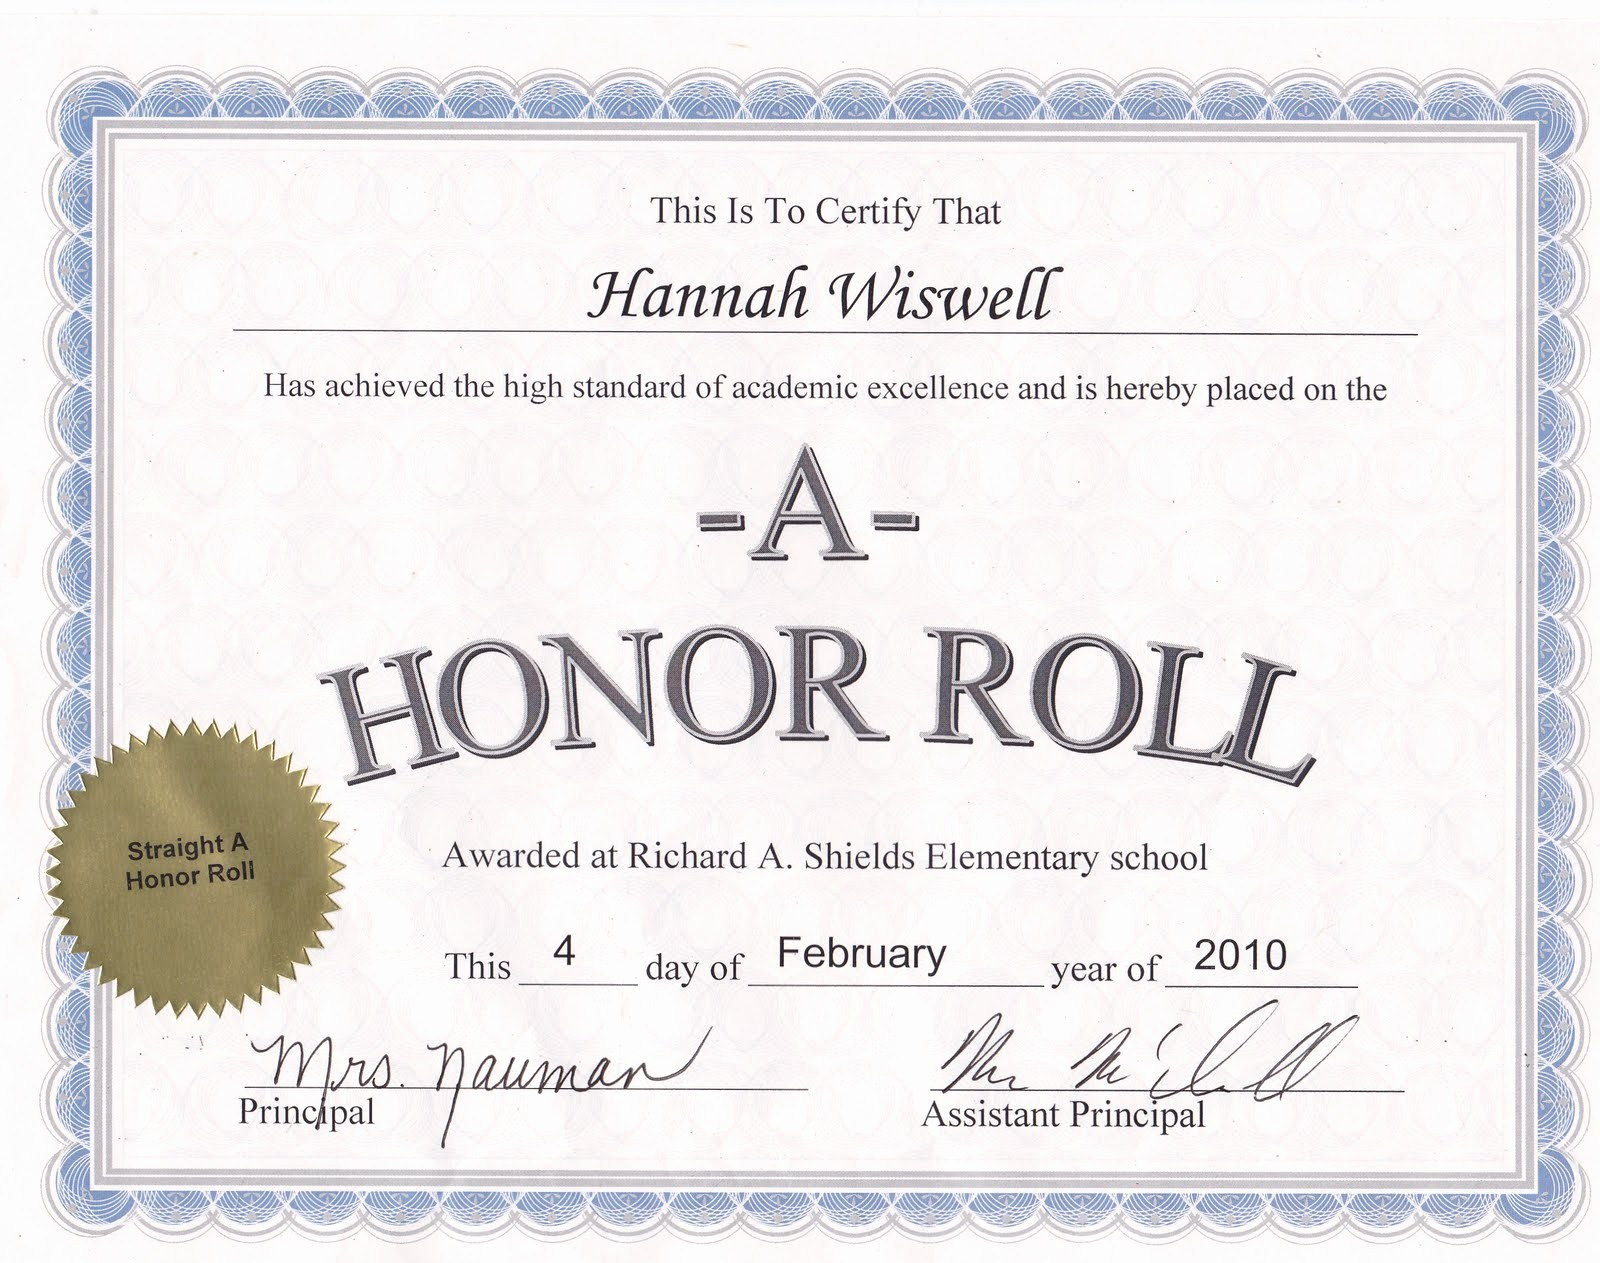 A B Honor Roll Certificate Meaning